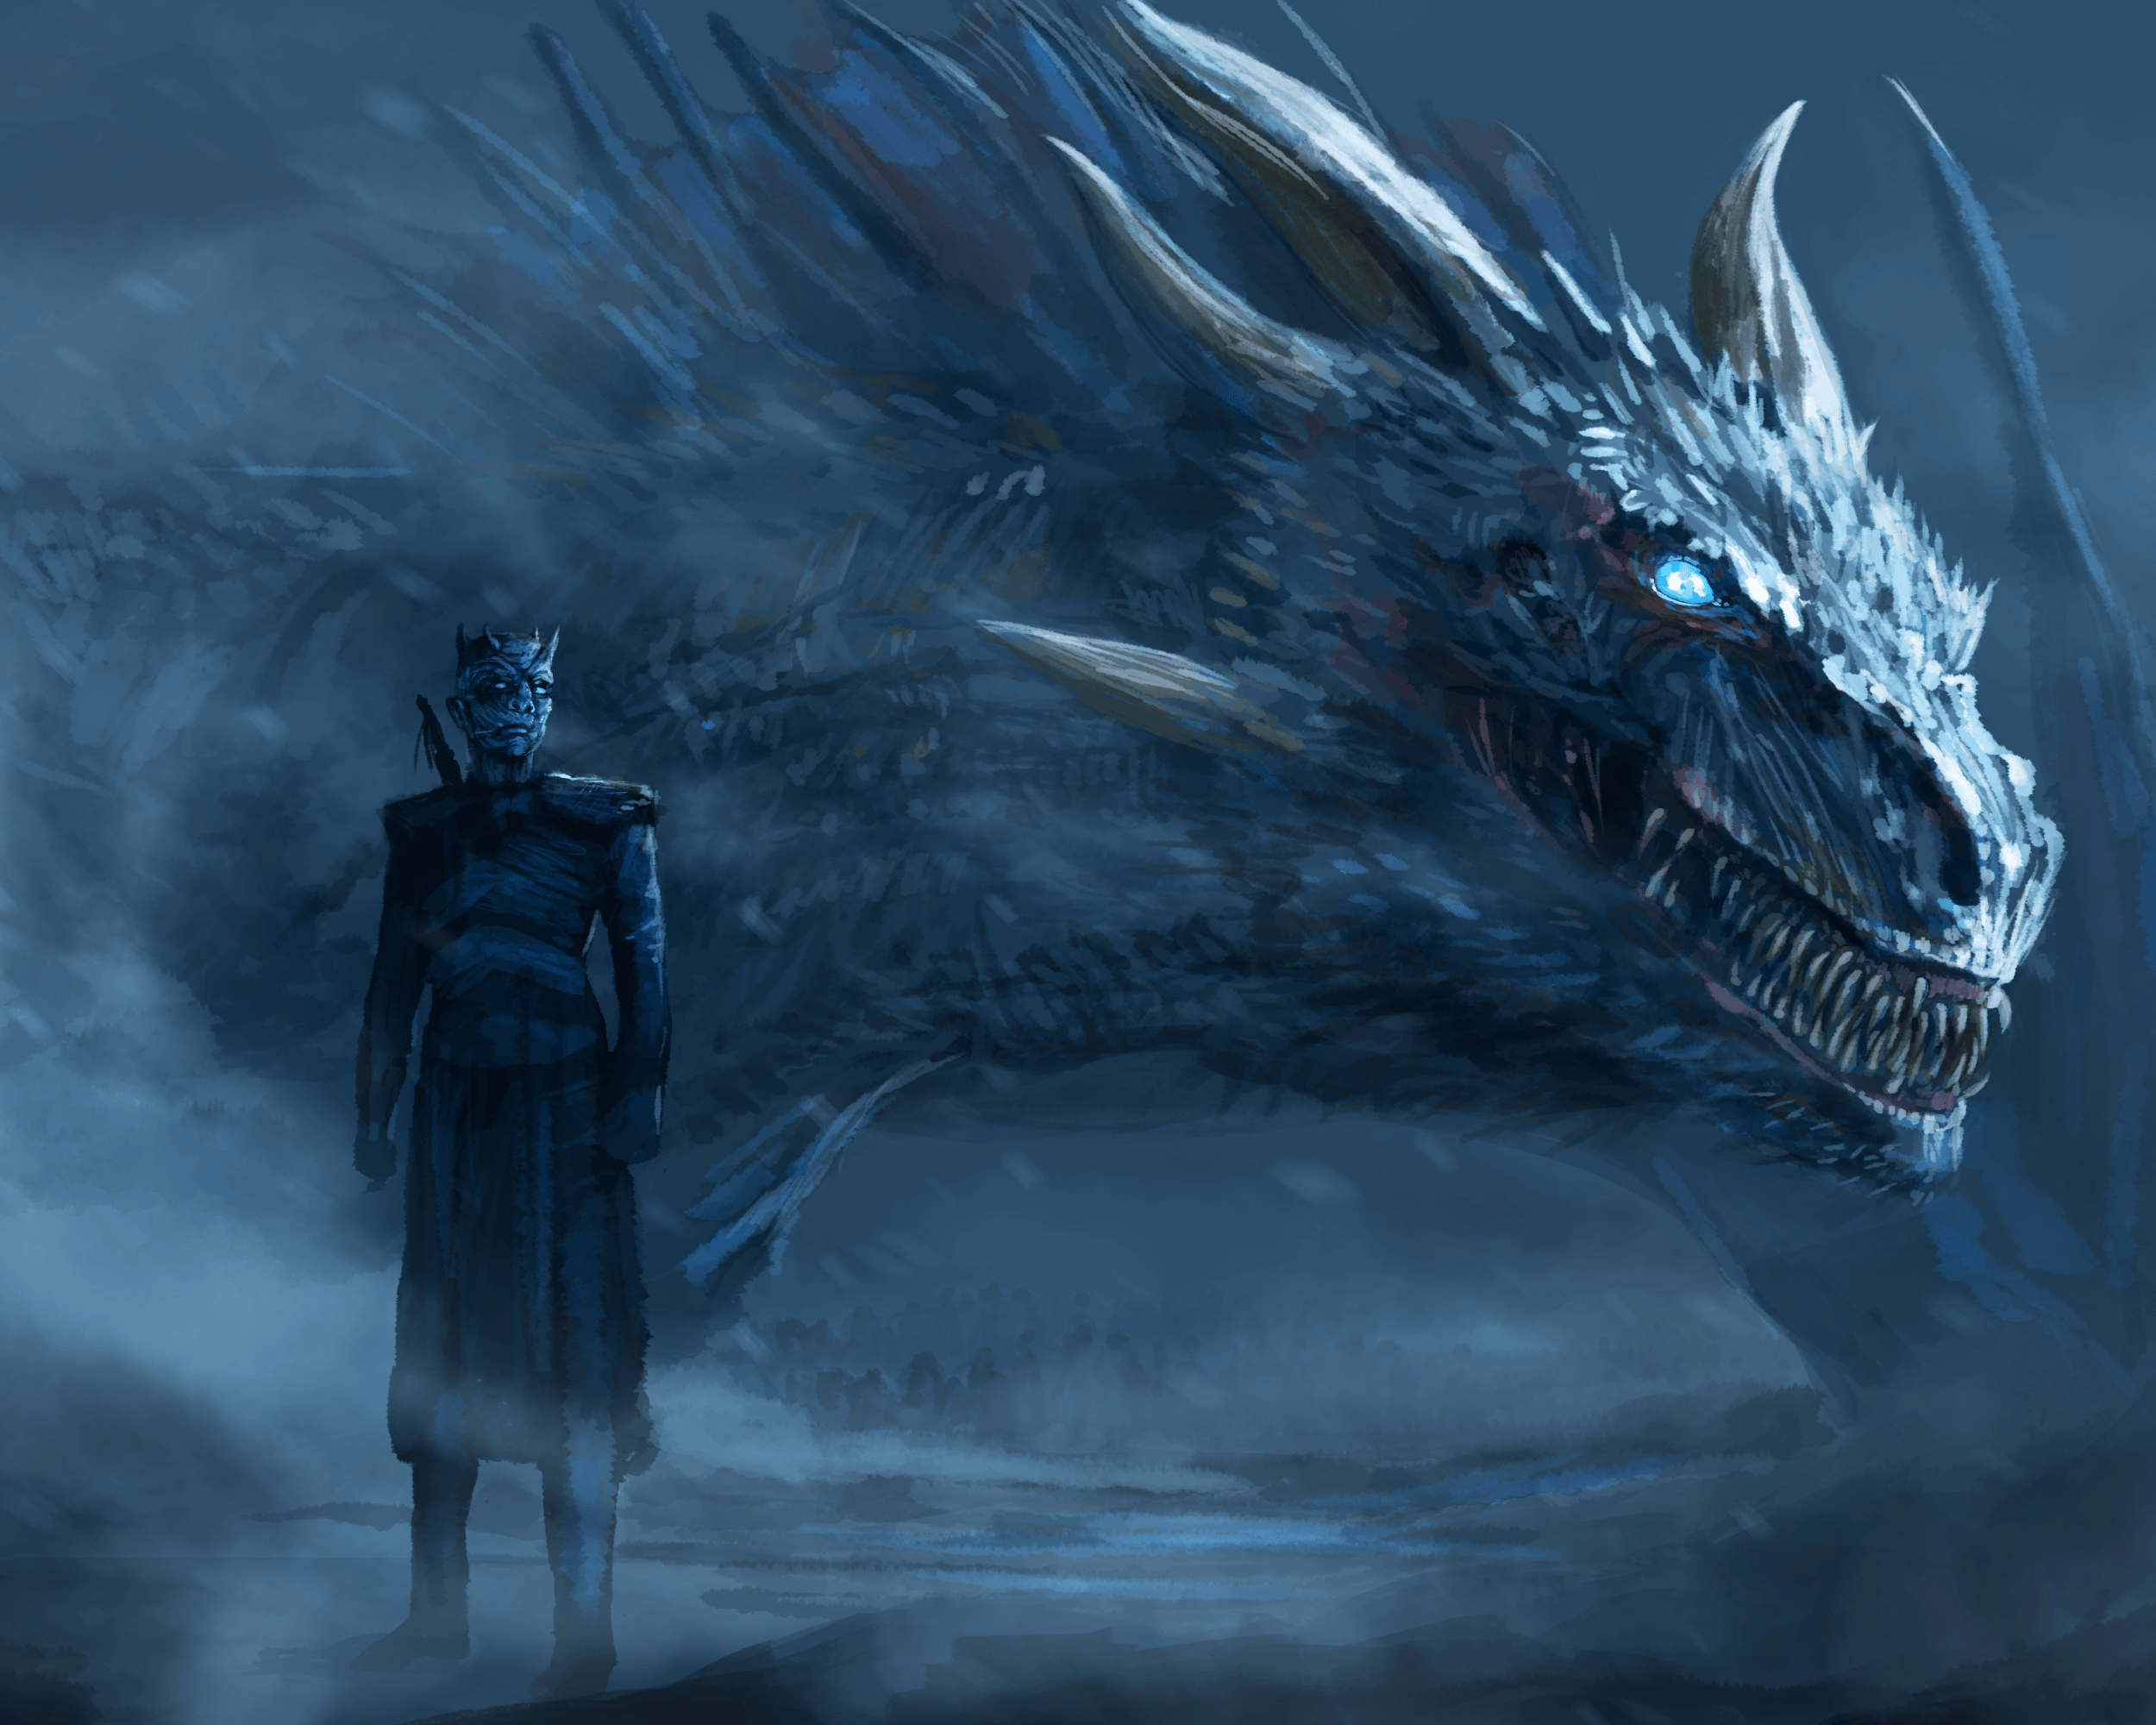 Ice Dragon Game of Thrones Wallpaper Free Ice Dragon Game of Thrones Background